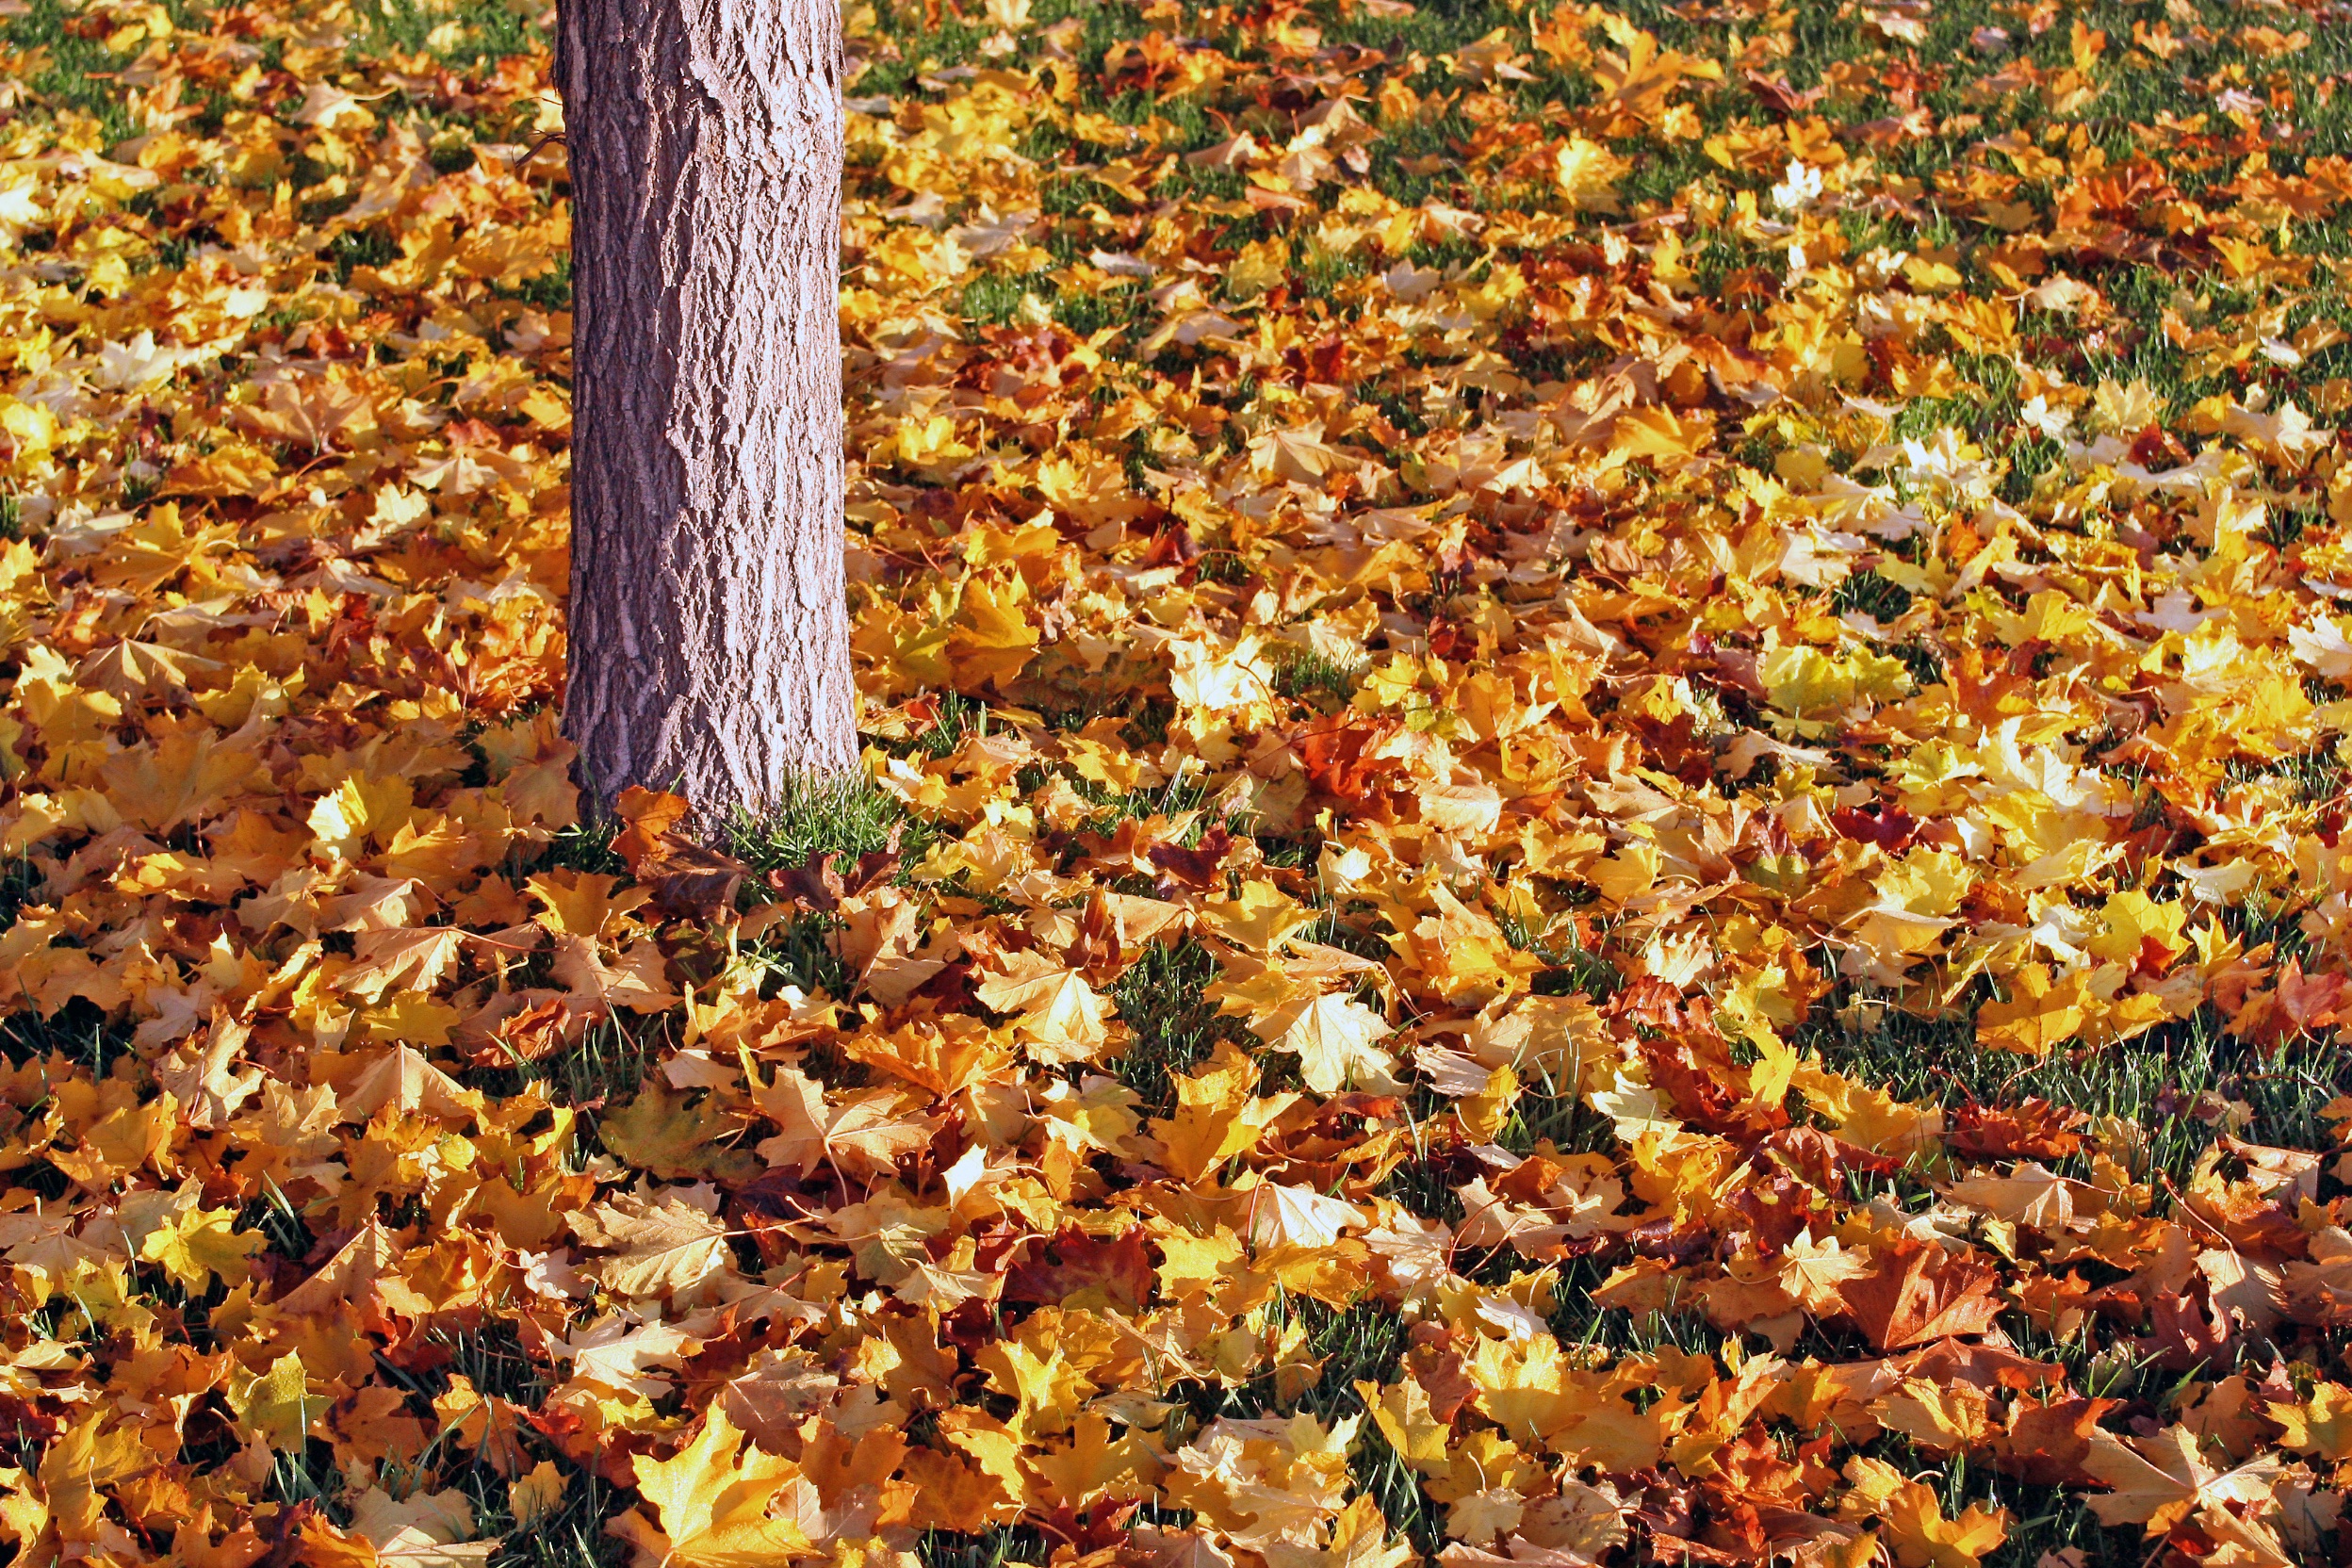 Fallen yellow leaves lie at the roots of the tree